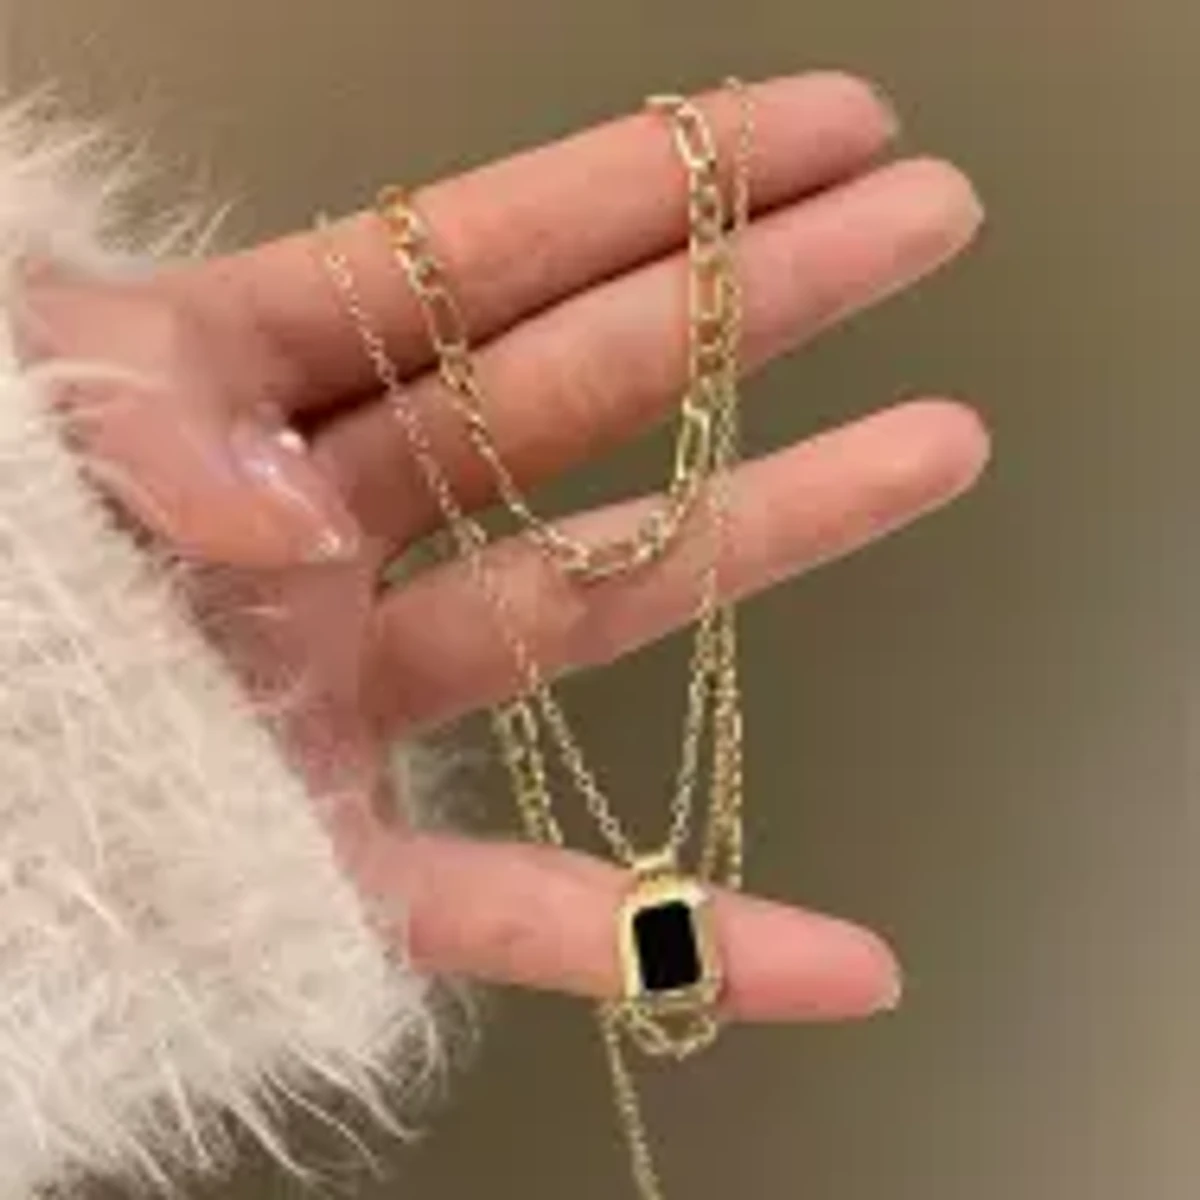 Fashion Black Square Pendant Necklace Gold Plating Double Layer Square Pendant Necklace Chains Stainless Steel Necklace For Women Girls Jewelry